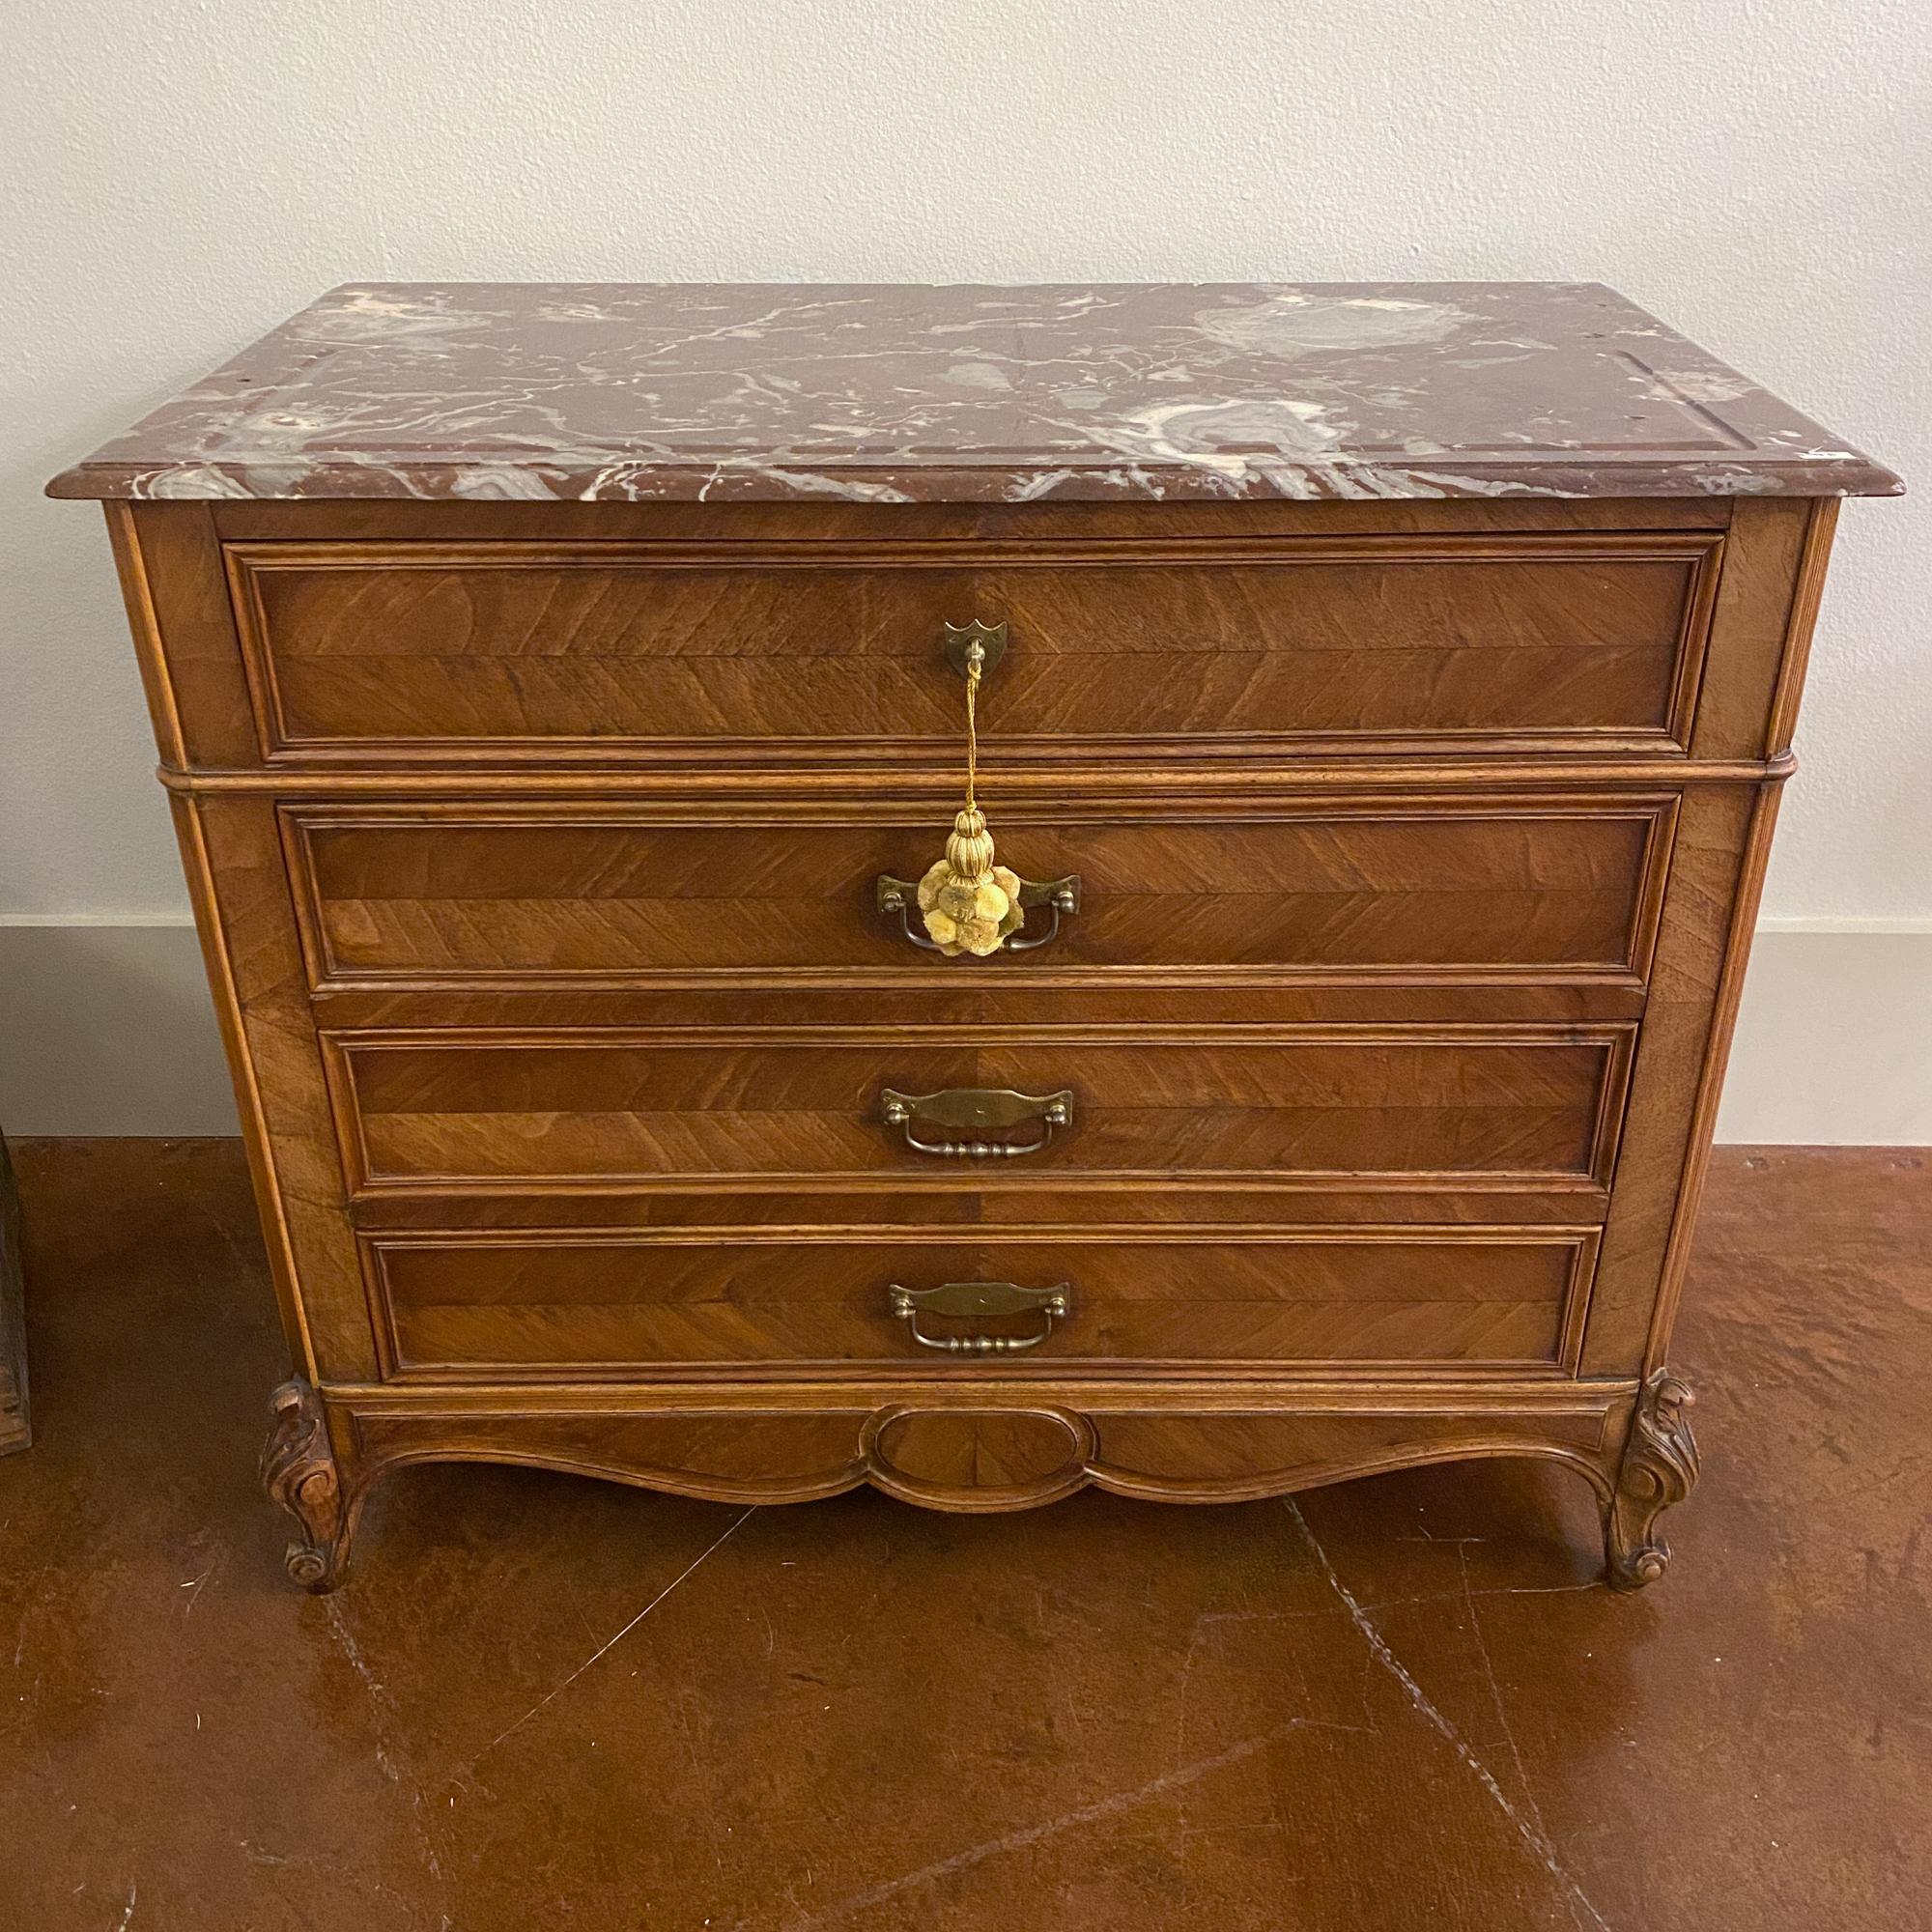 French 19th Century Louis XV Style Carved Wood Chest with Veneer Details and Marble Top